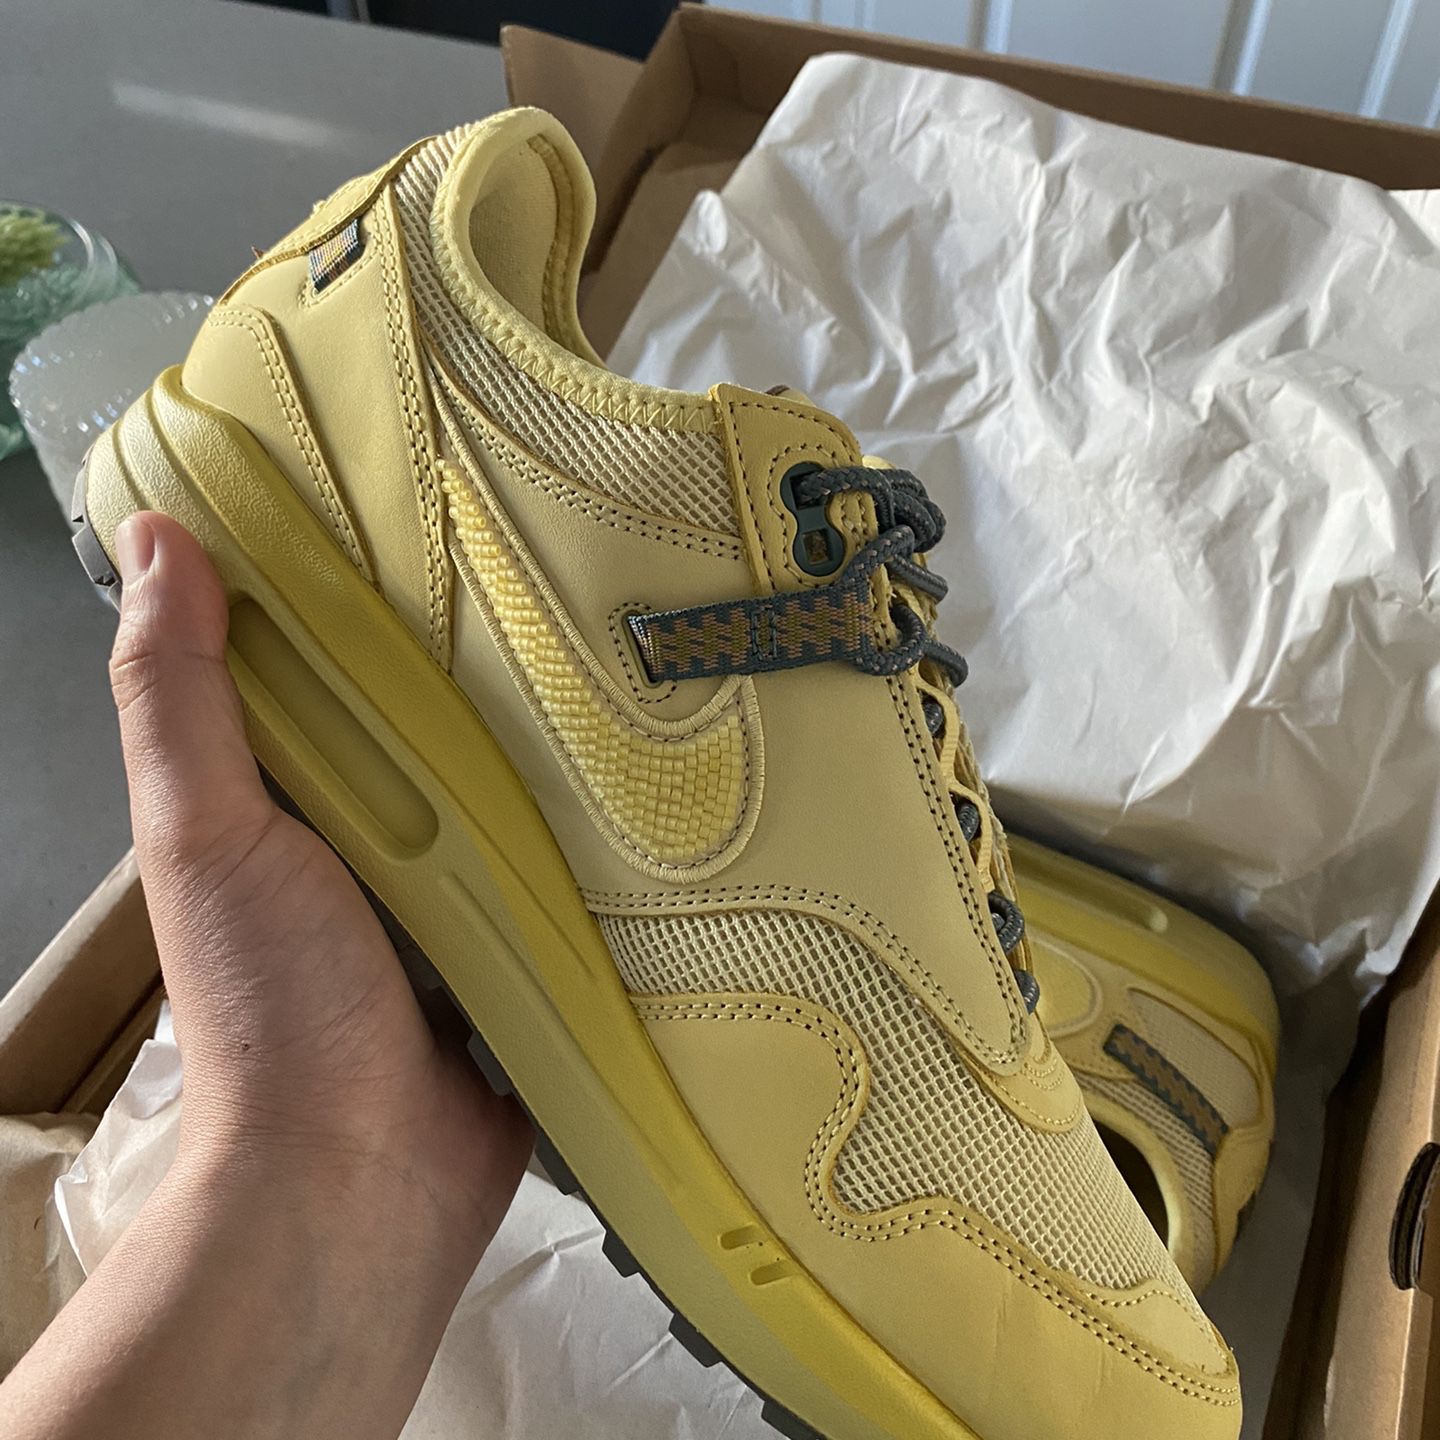 Nike Air Max 1 Travis Scott Cactus Jack Saturn Gold DS for Sale in 